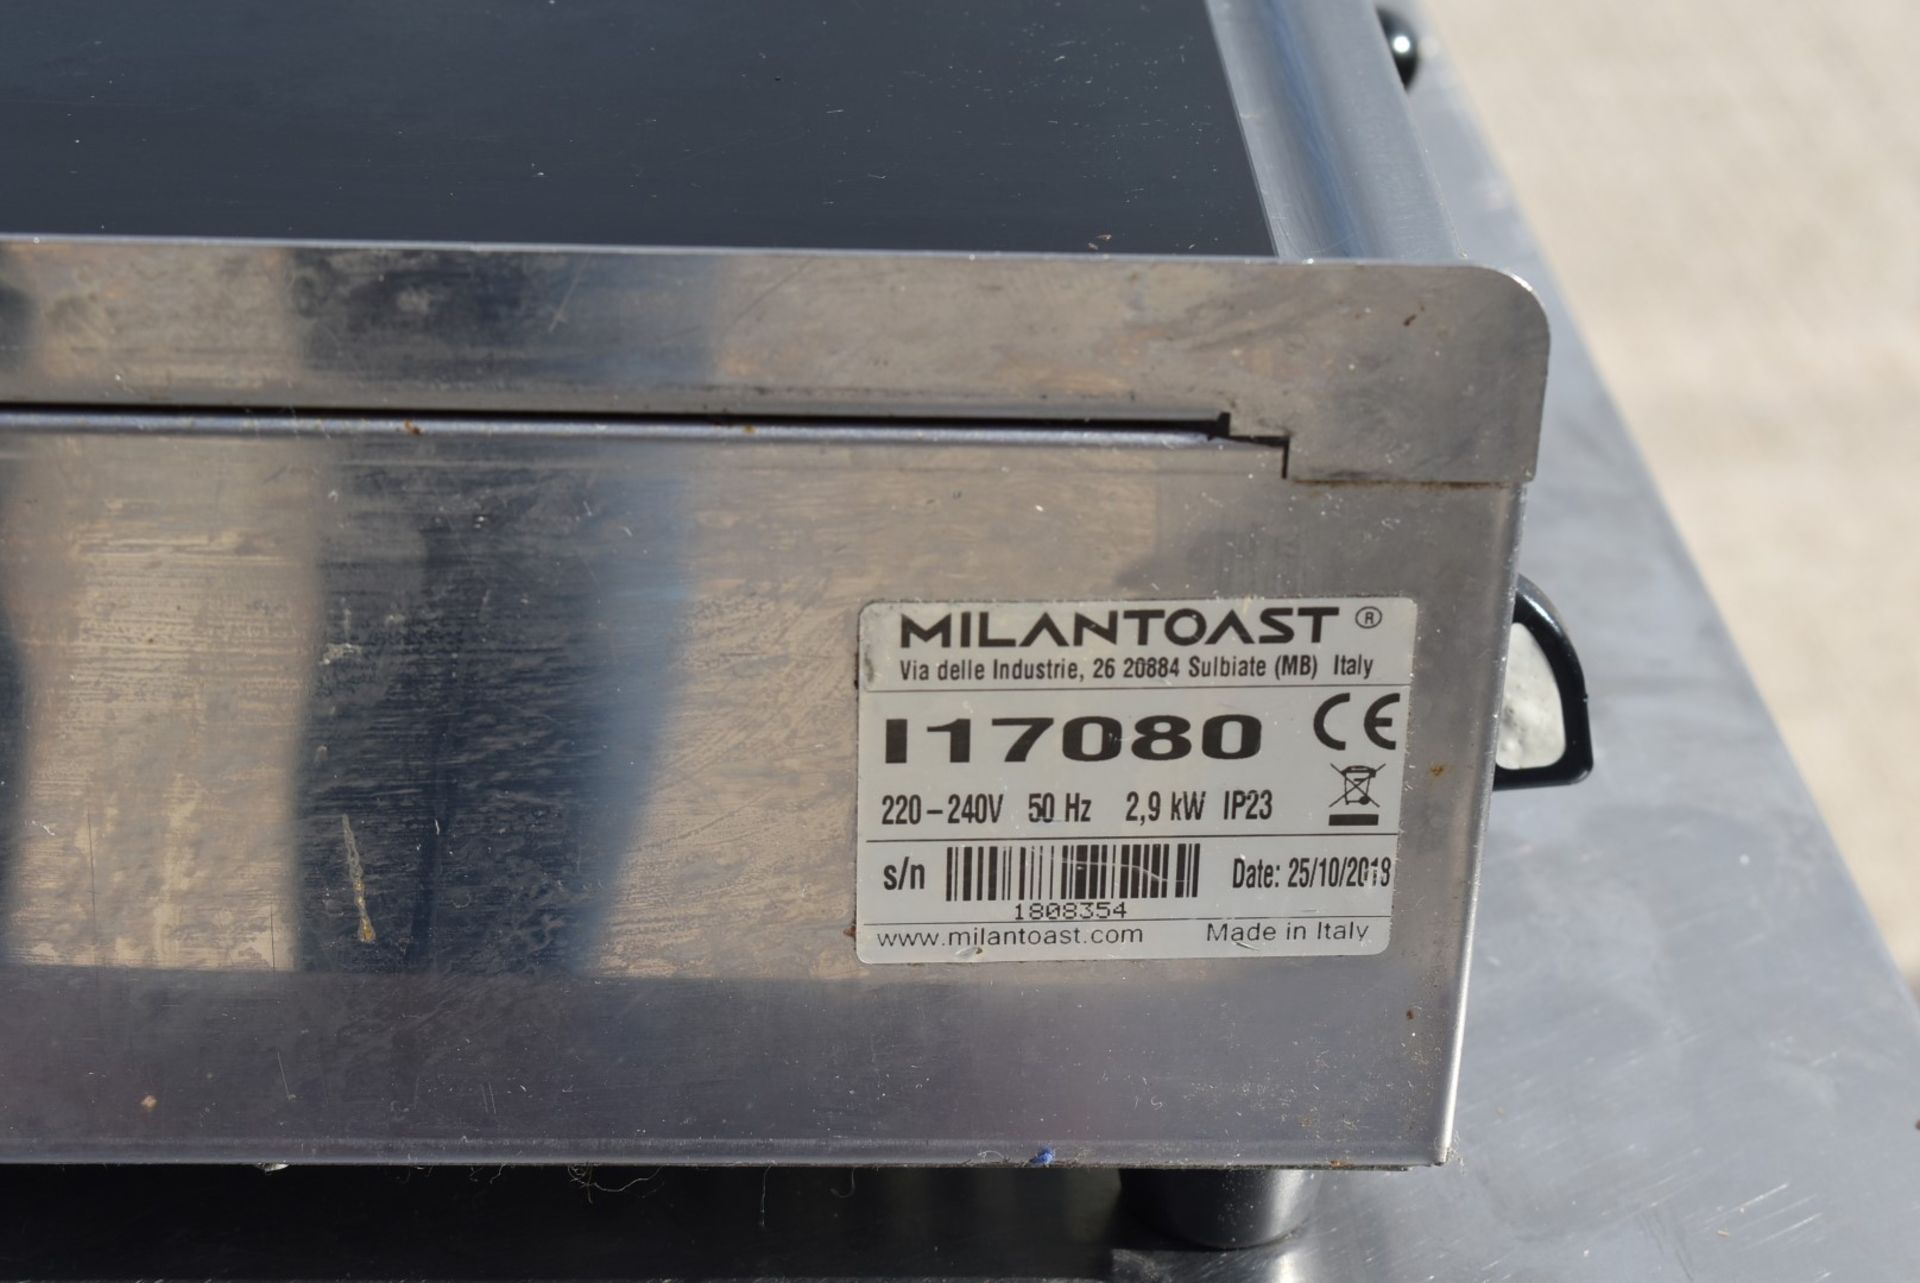 1 x Maestrowave Milantoast Countertop Ceramic Hotplate - 240v - Recently Removed From a Dark Kitchen - Image 5 of 11